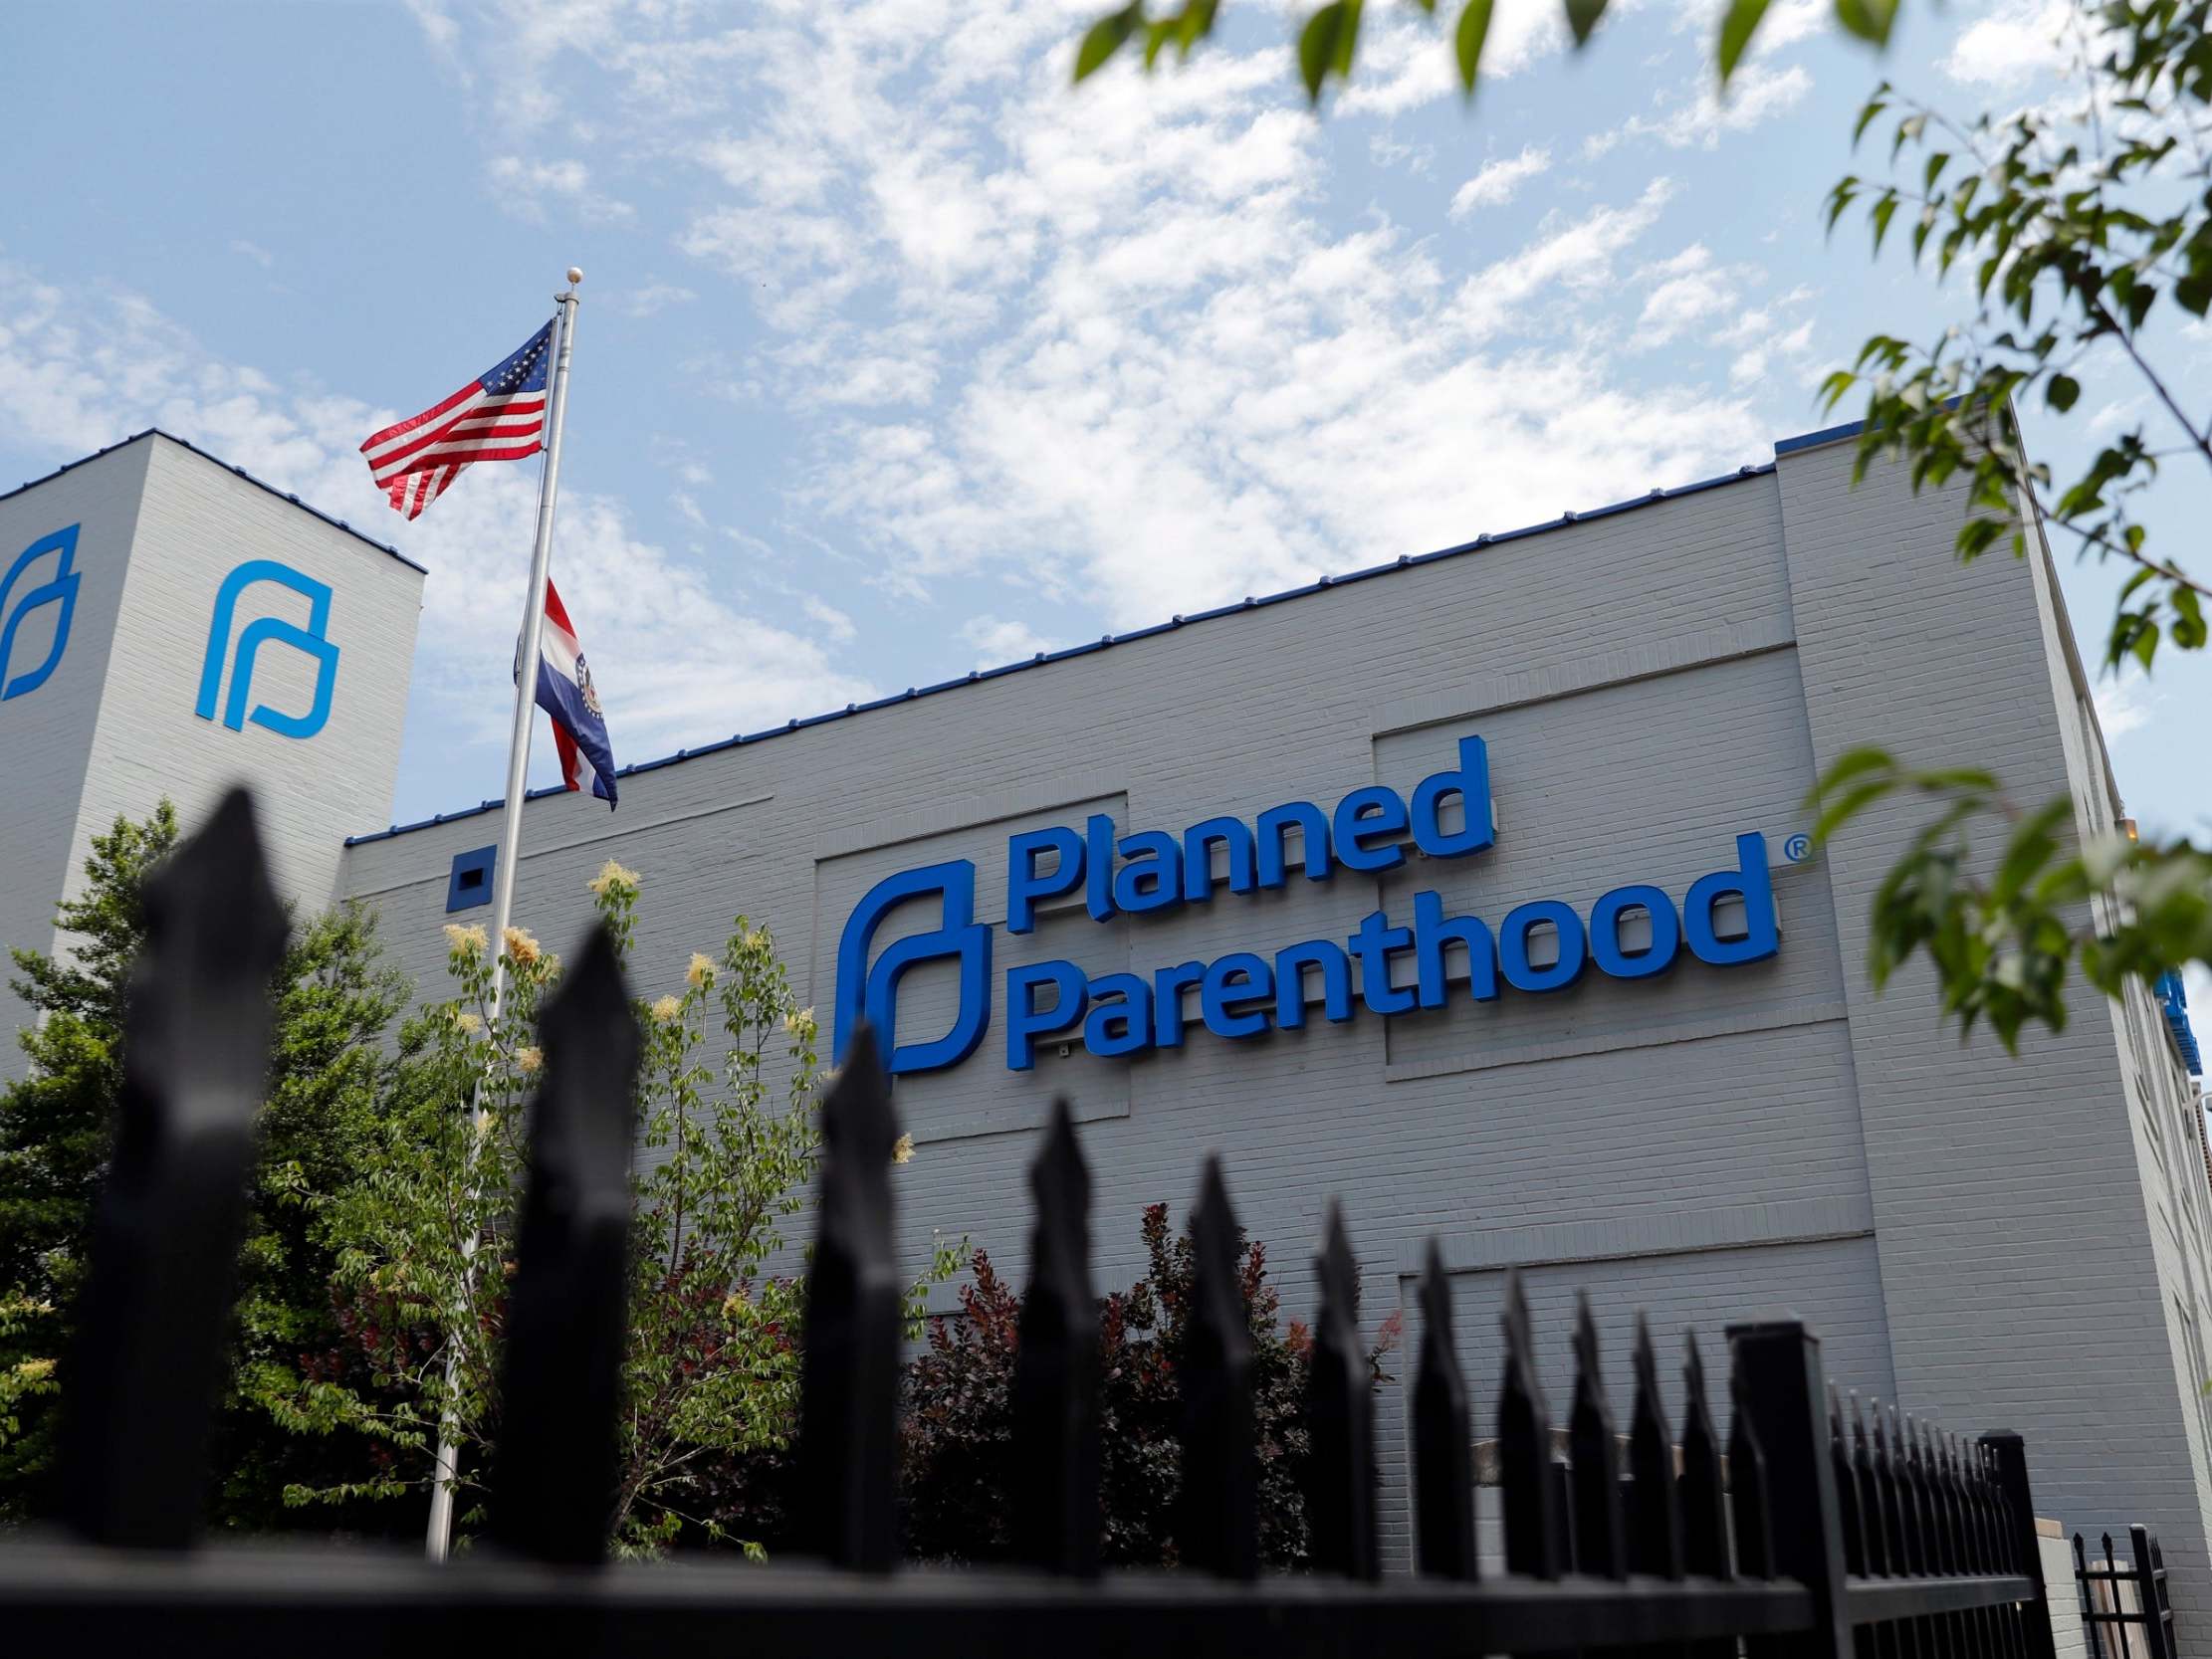 The existing Planned Parenthood facility in Missouri